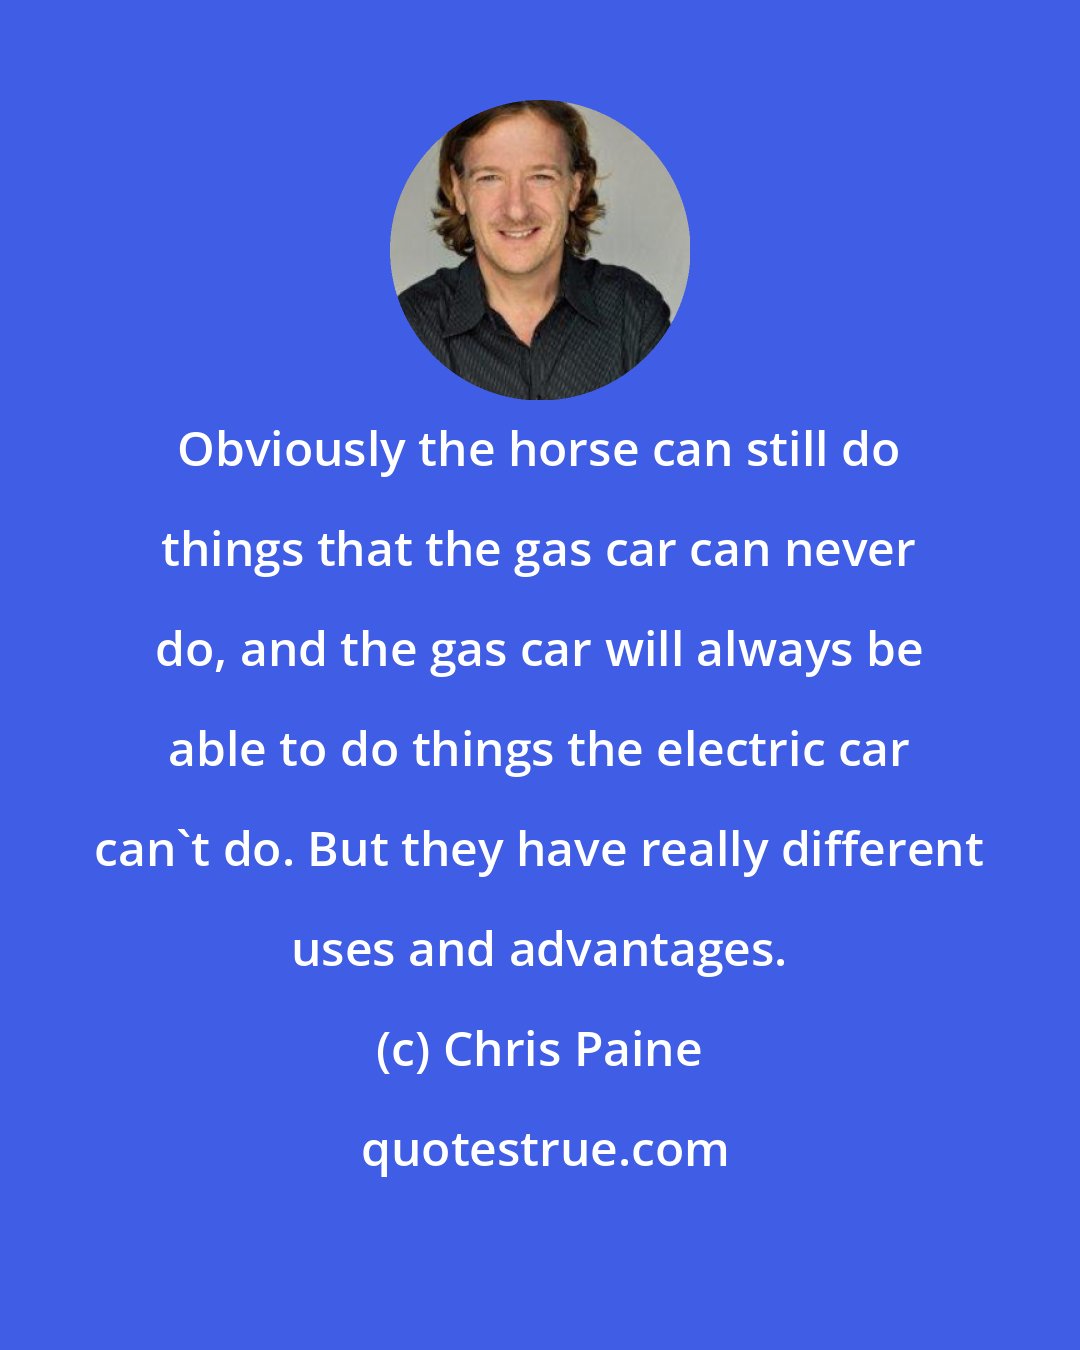 Chris Paine: Obviously the horse can still do things that the gas car can never do, and the gas car will always be able to do things the electric car can't do. But they have really different uses and advantages.